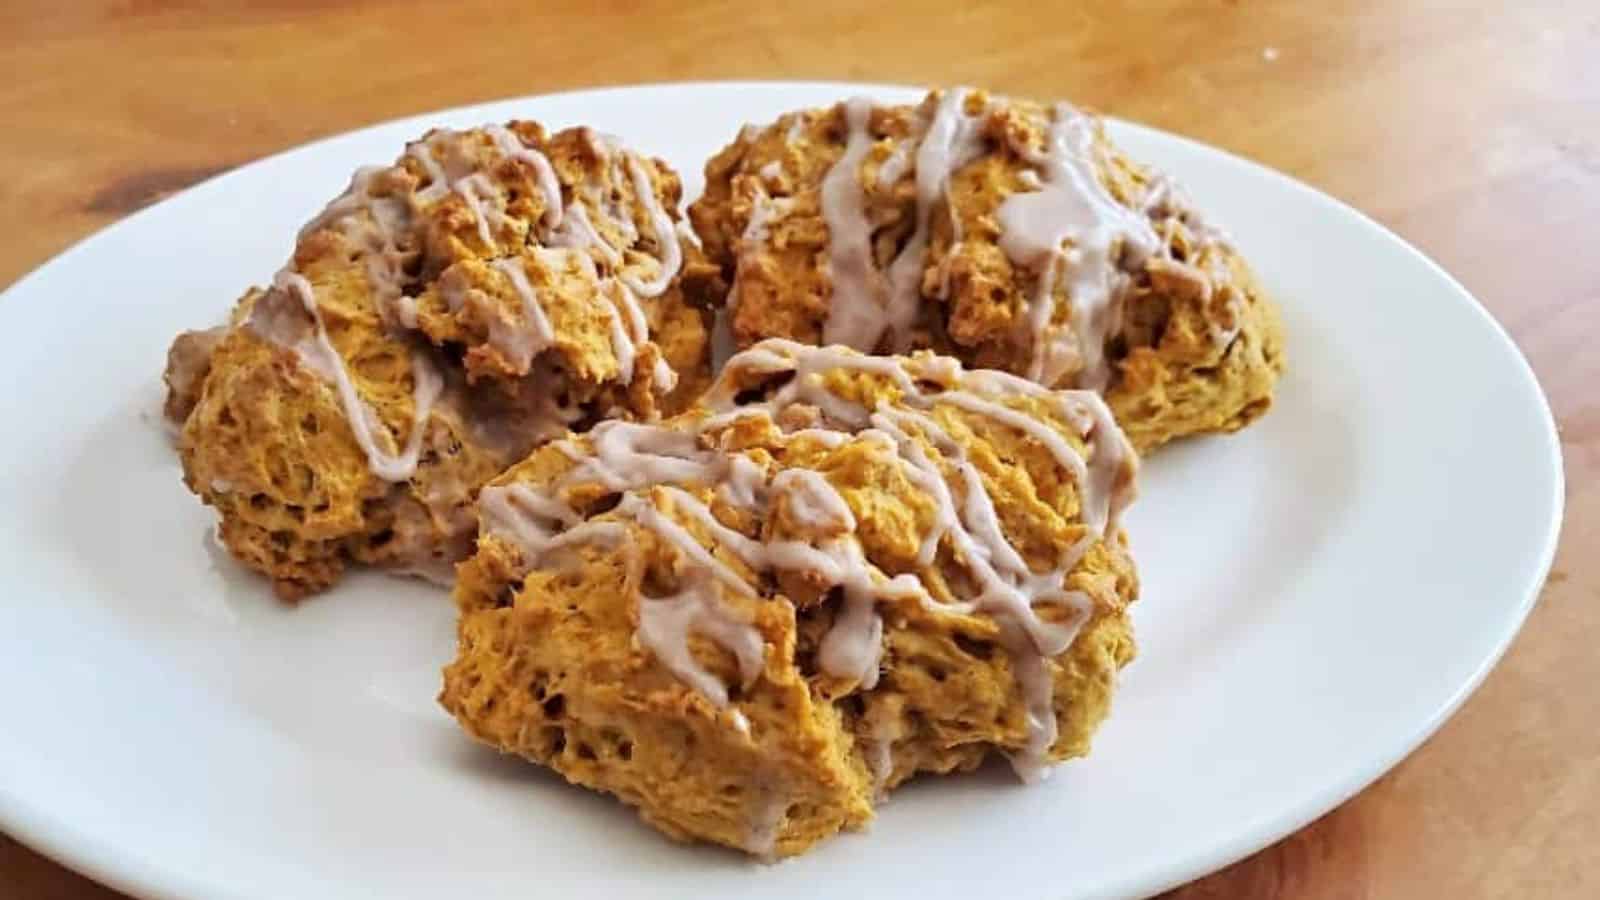 Image shows Three pumpkin scones on a plate with icing.